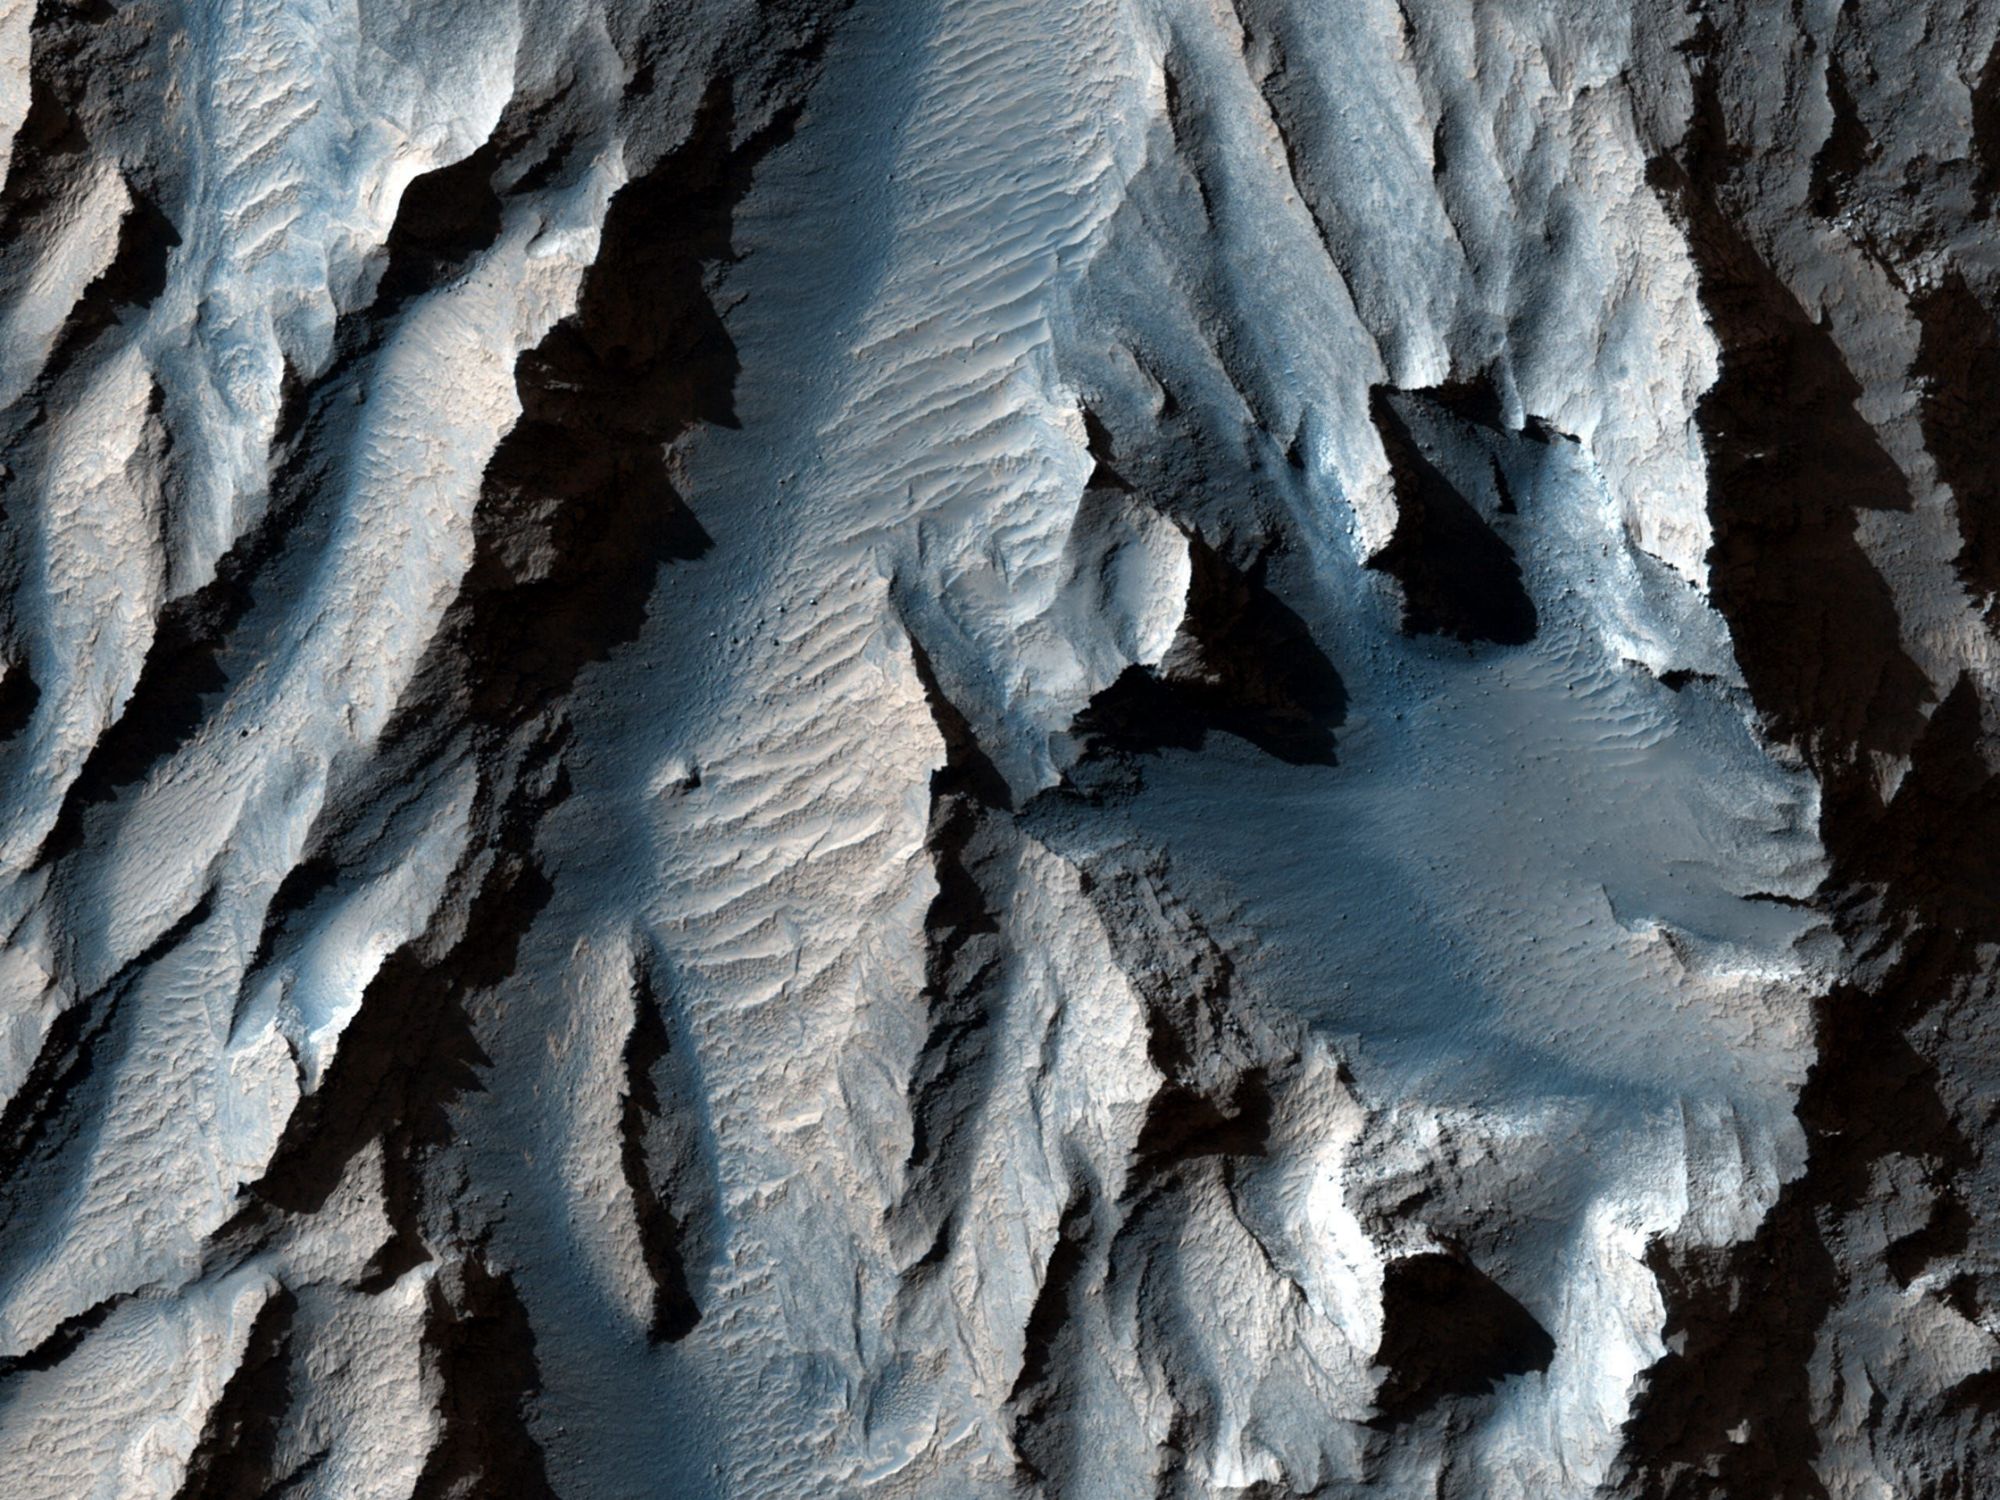 NASA says the new images reveal a huge valley on the surface of Mars, the largest in the solar system